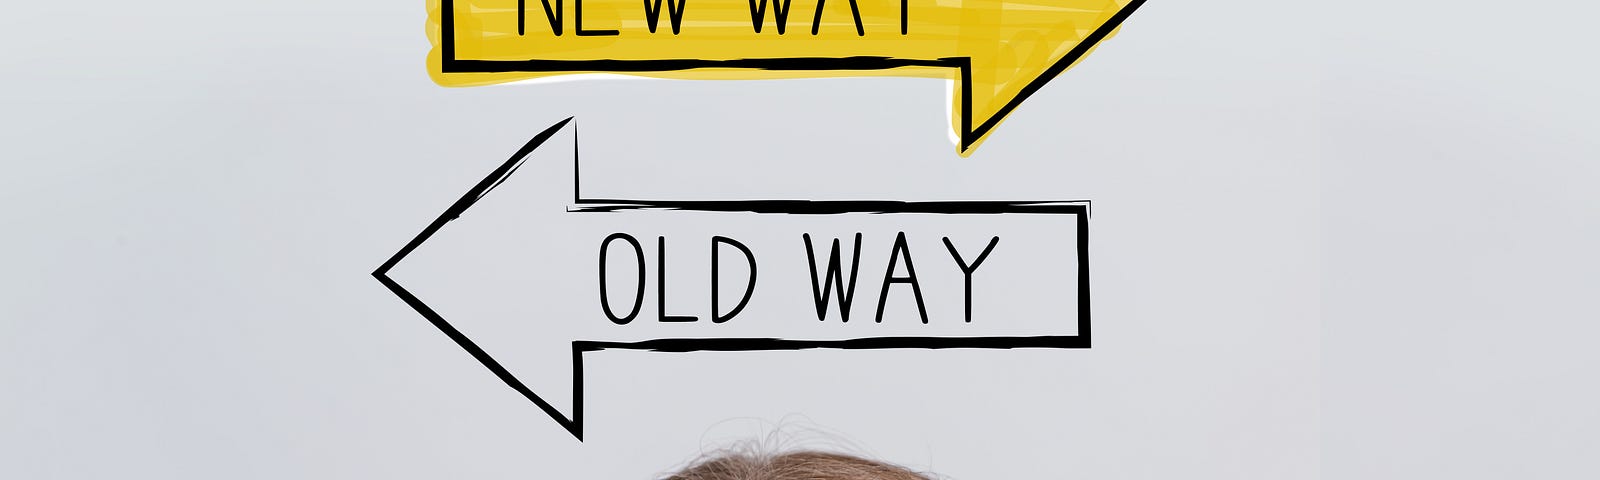 Girl looking up to two arrows, one pointing left saying “Old way”, the other pointing right saying “New way”